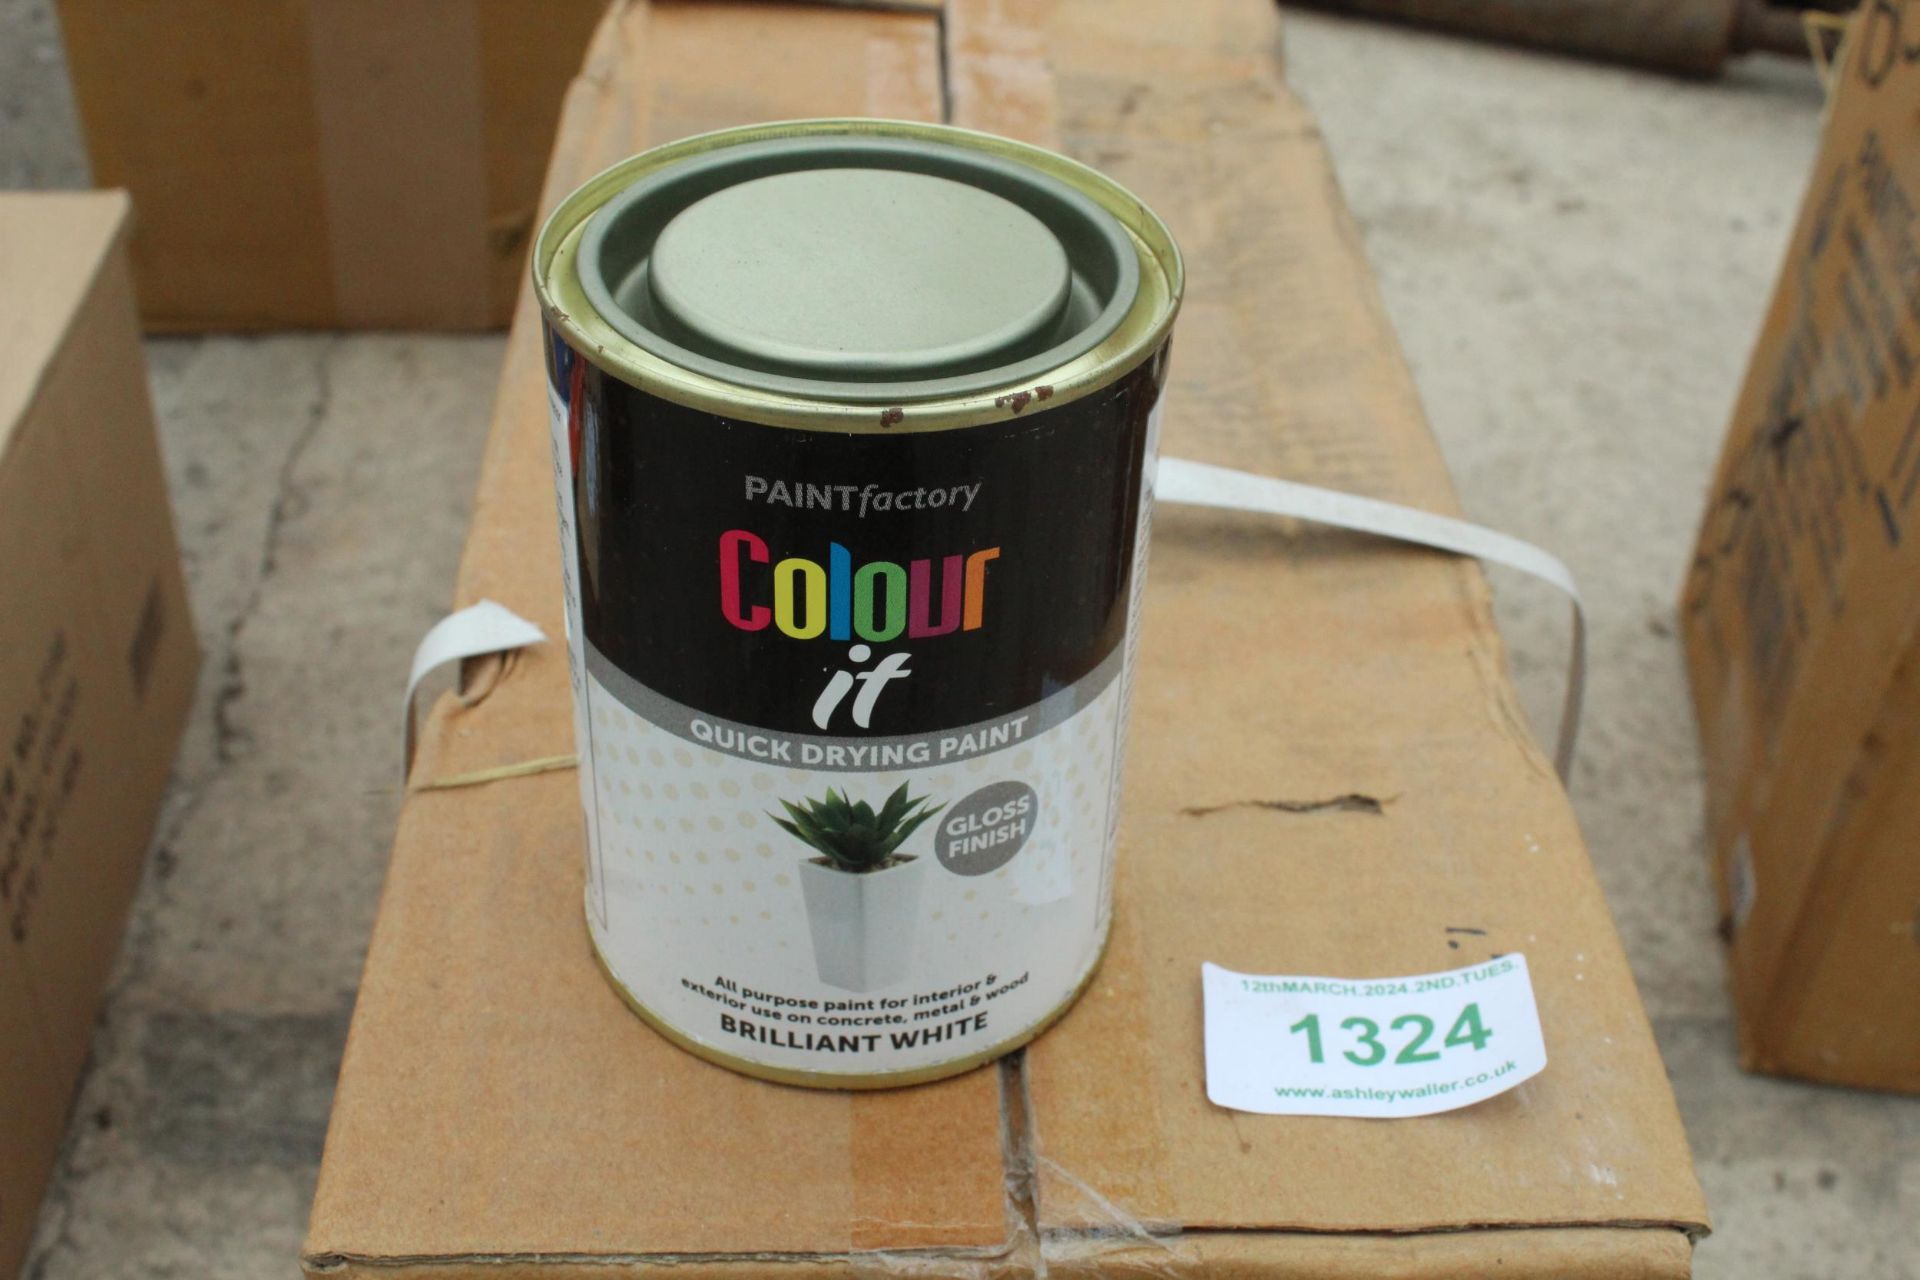 24 TINS OF NEW WHITE GLOSS PAINT NO VAT - Image 2 of 2